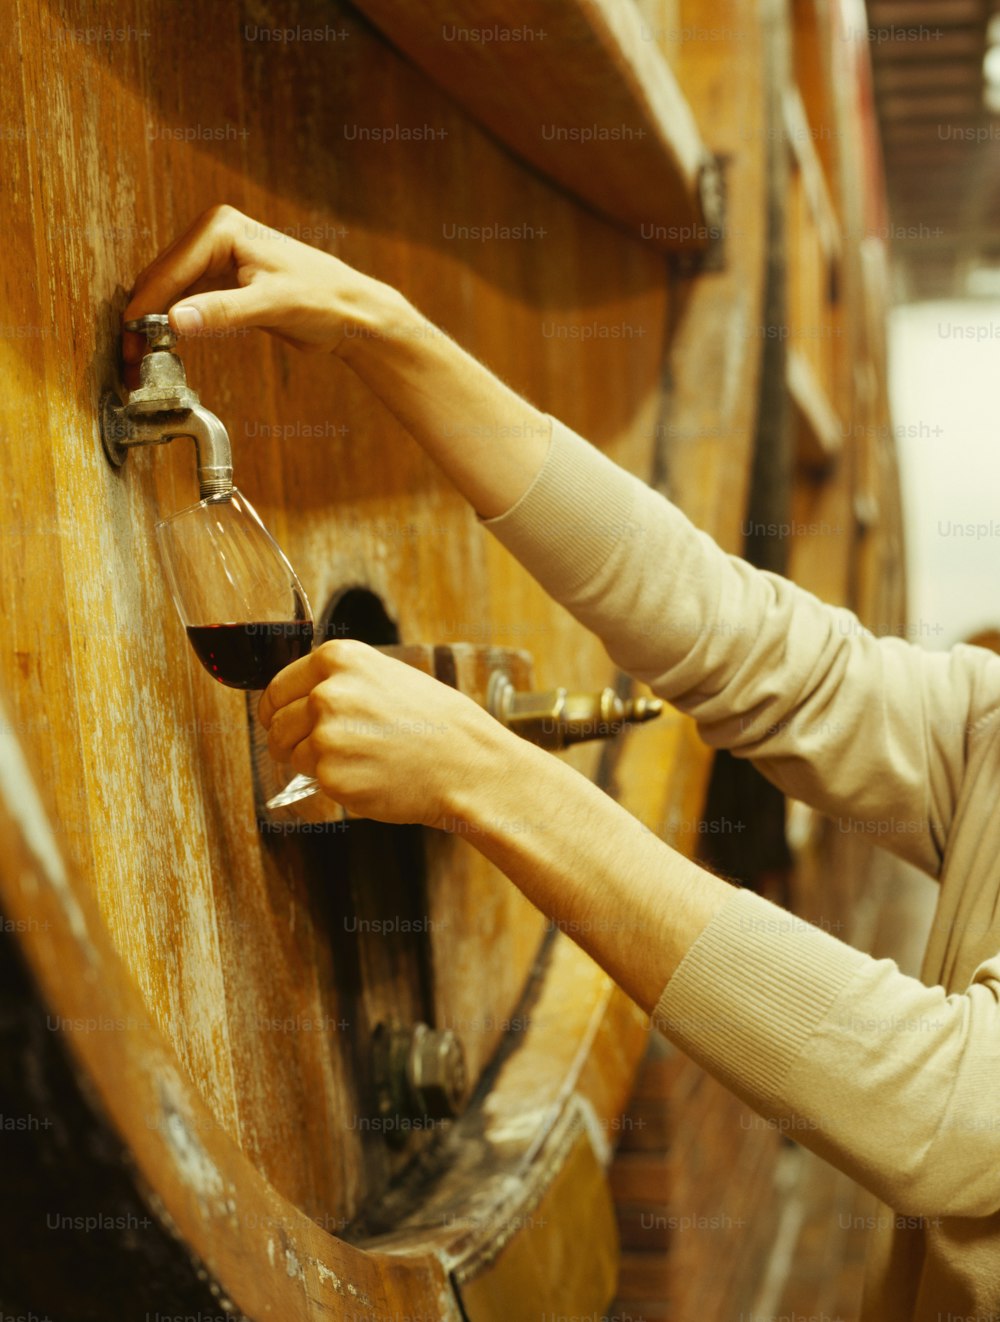 a woman pouring a glass of wine into a wooden barrel